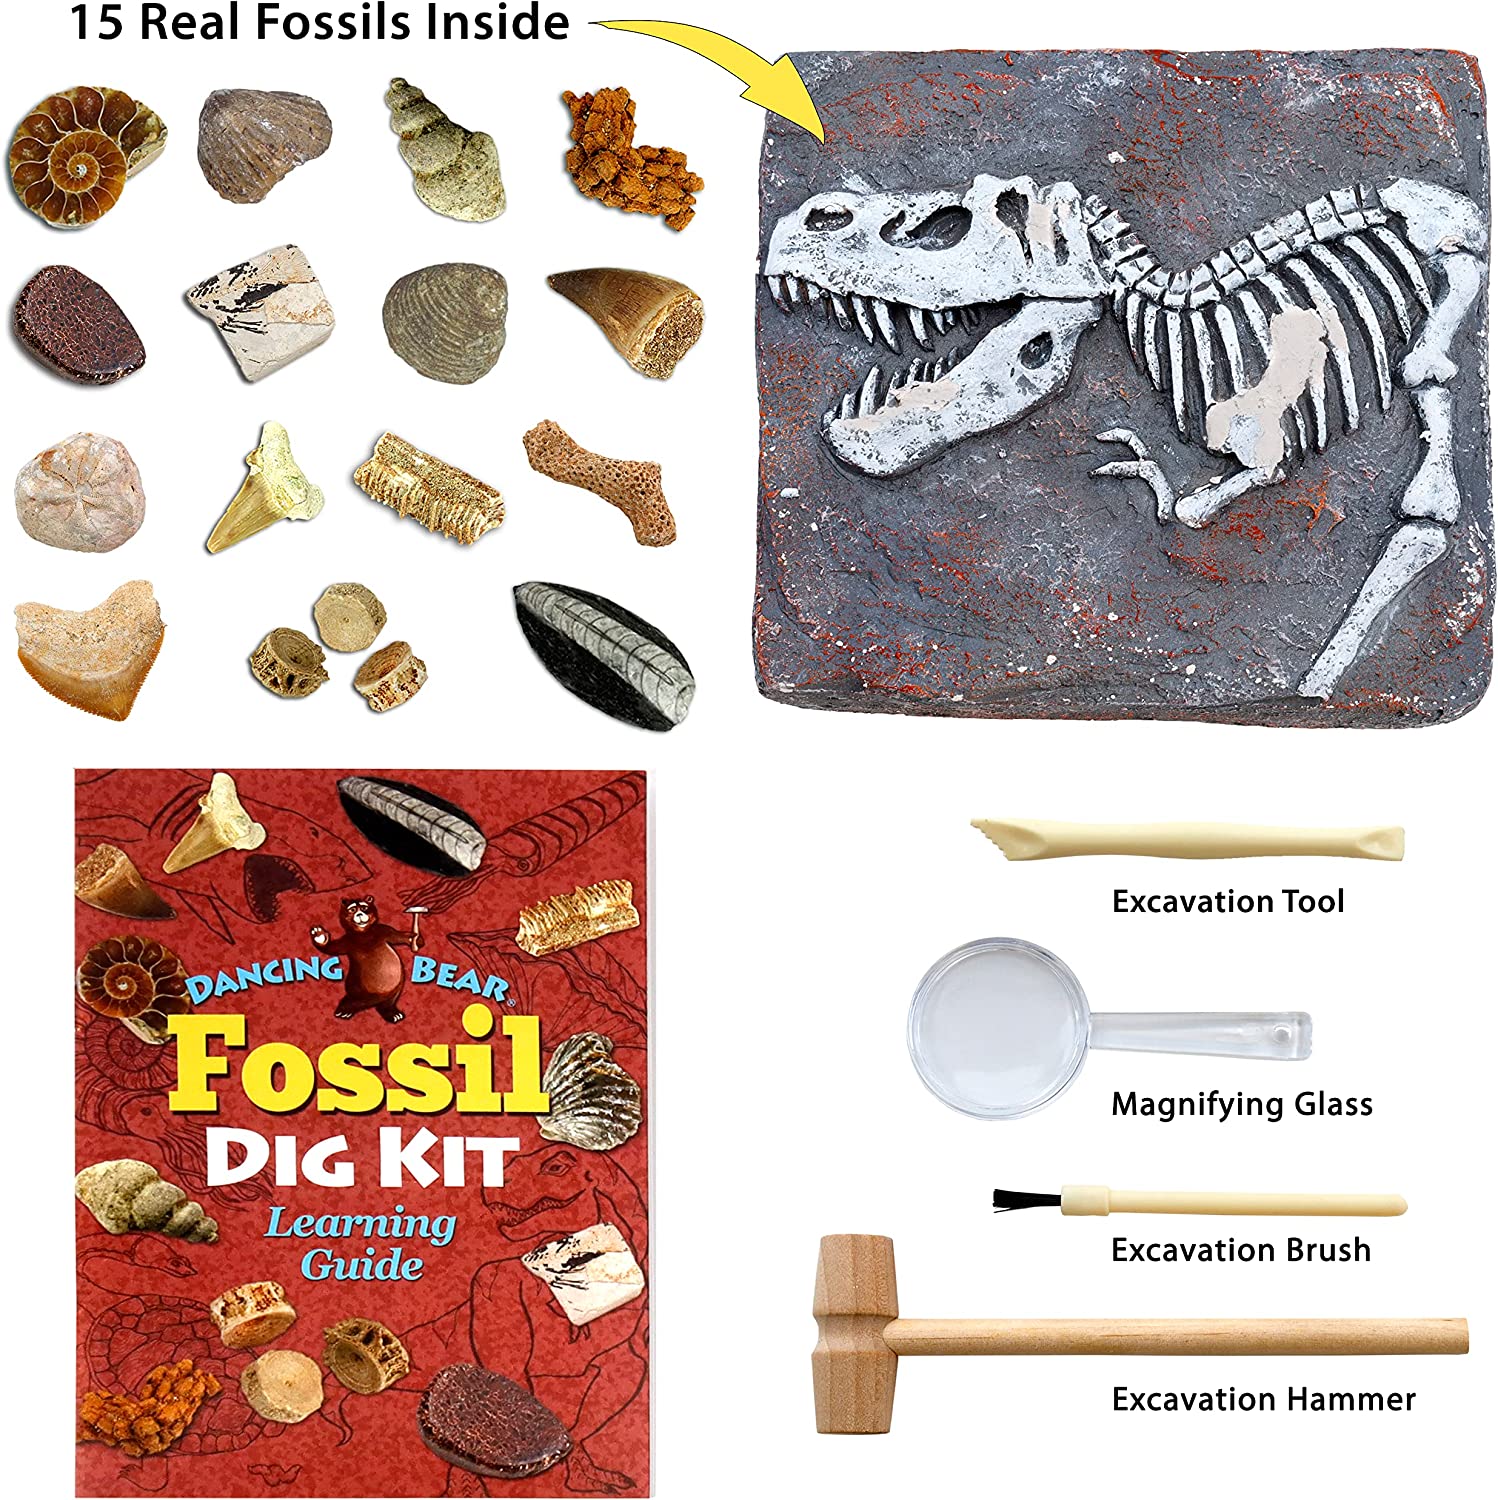 I Dig It! Rocks! Fossils! Mineral and Fossil Excavation